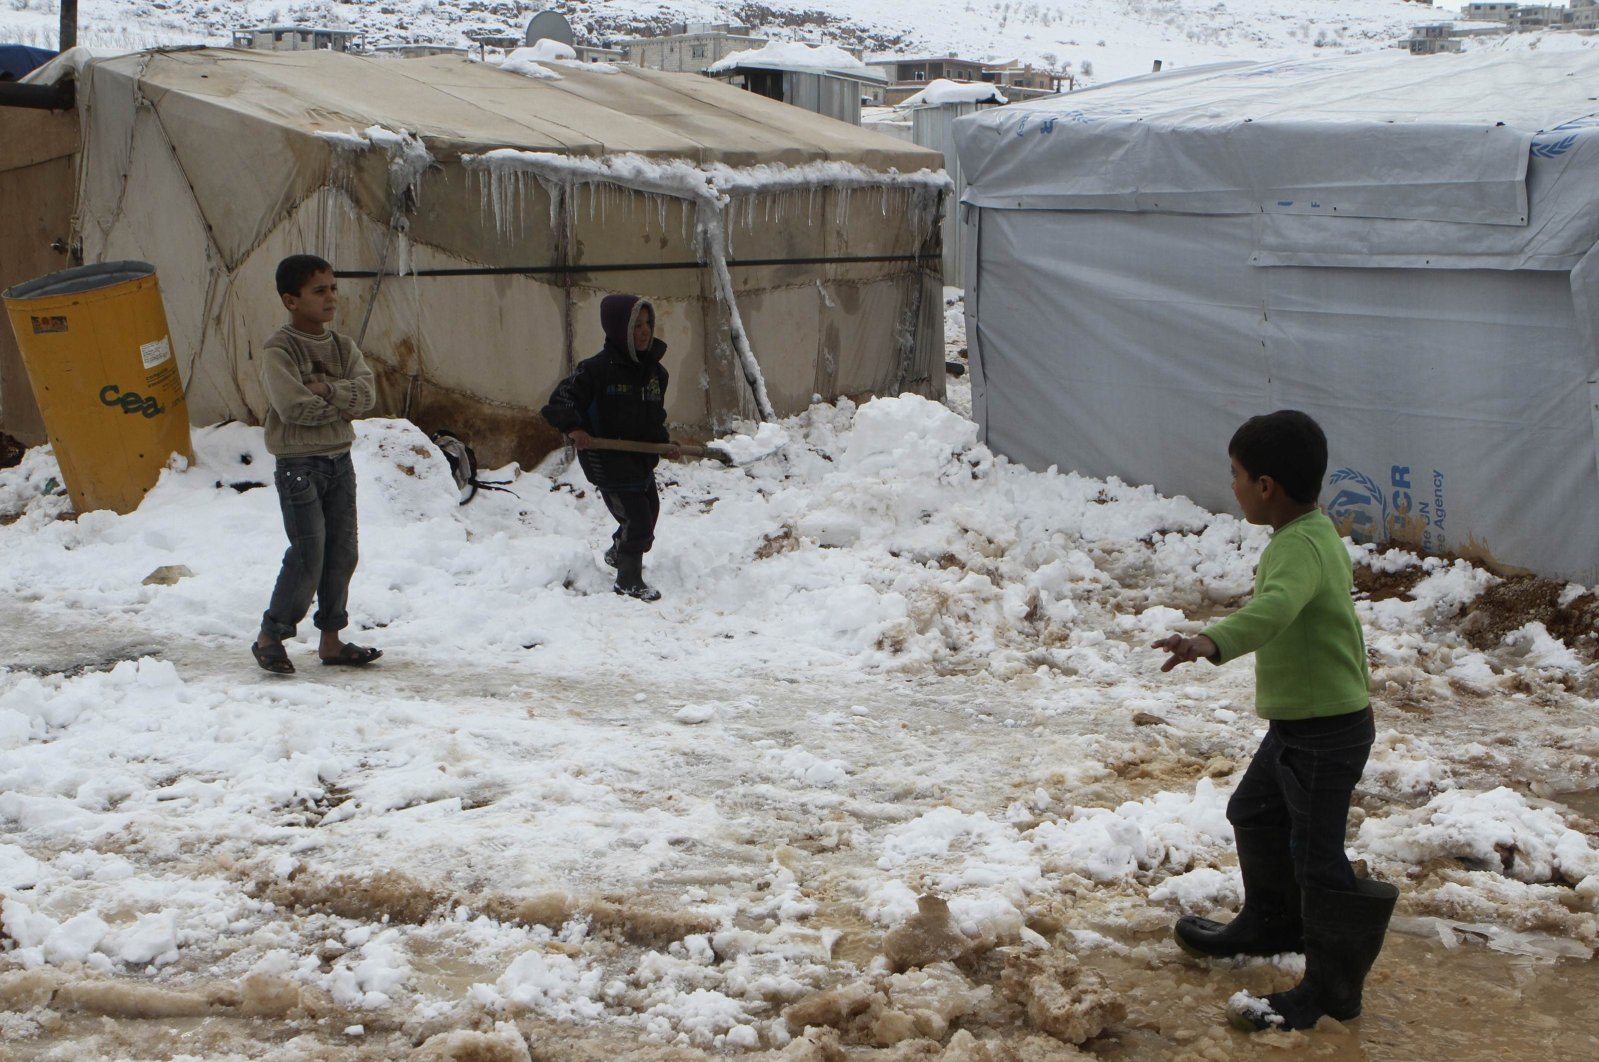 A Syrian refugee child shovels snow outside a tent in Aarsal town in eastern Bekaa, Lebanon, Dec. 13, 2013. (Reuters Photo)